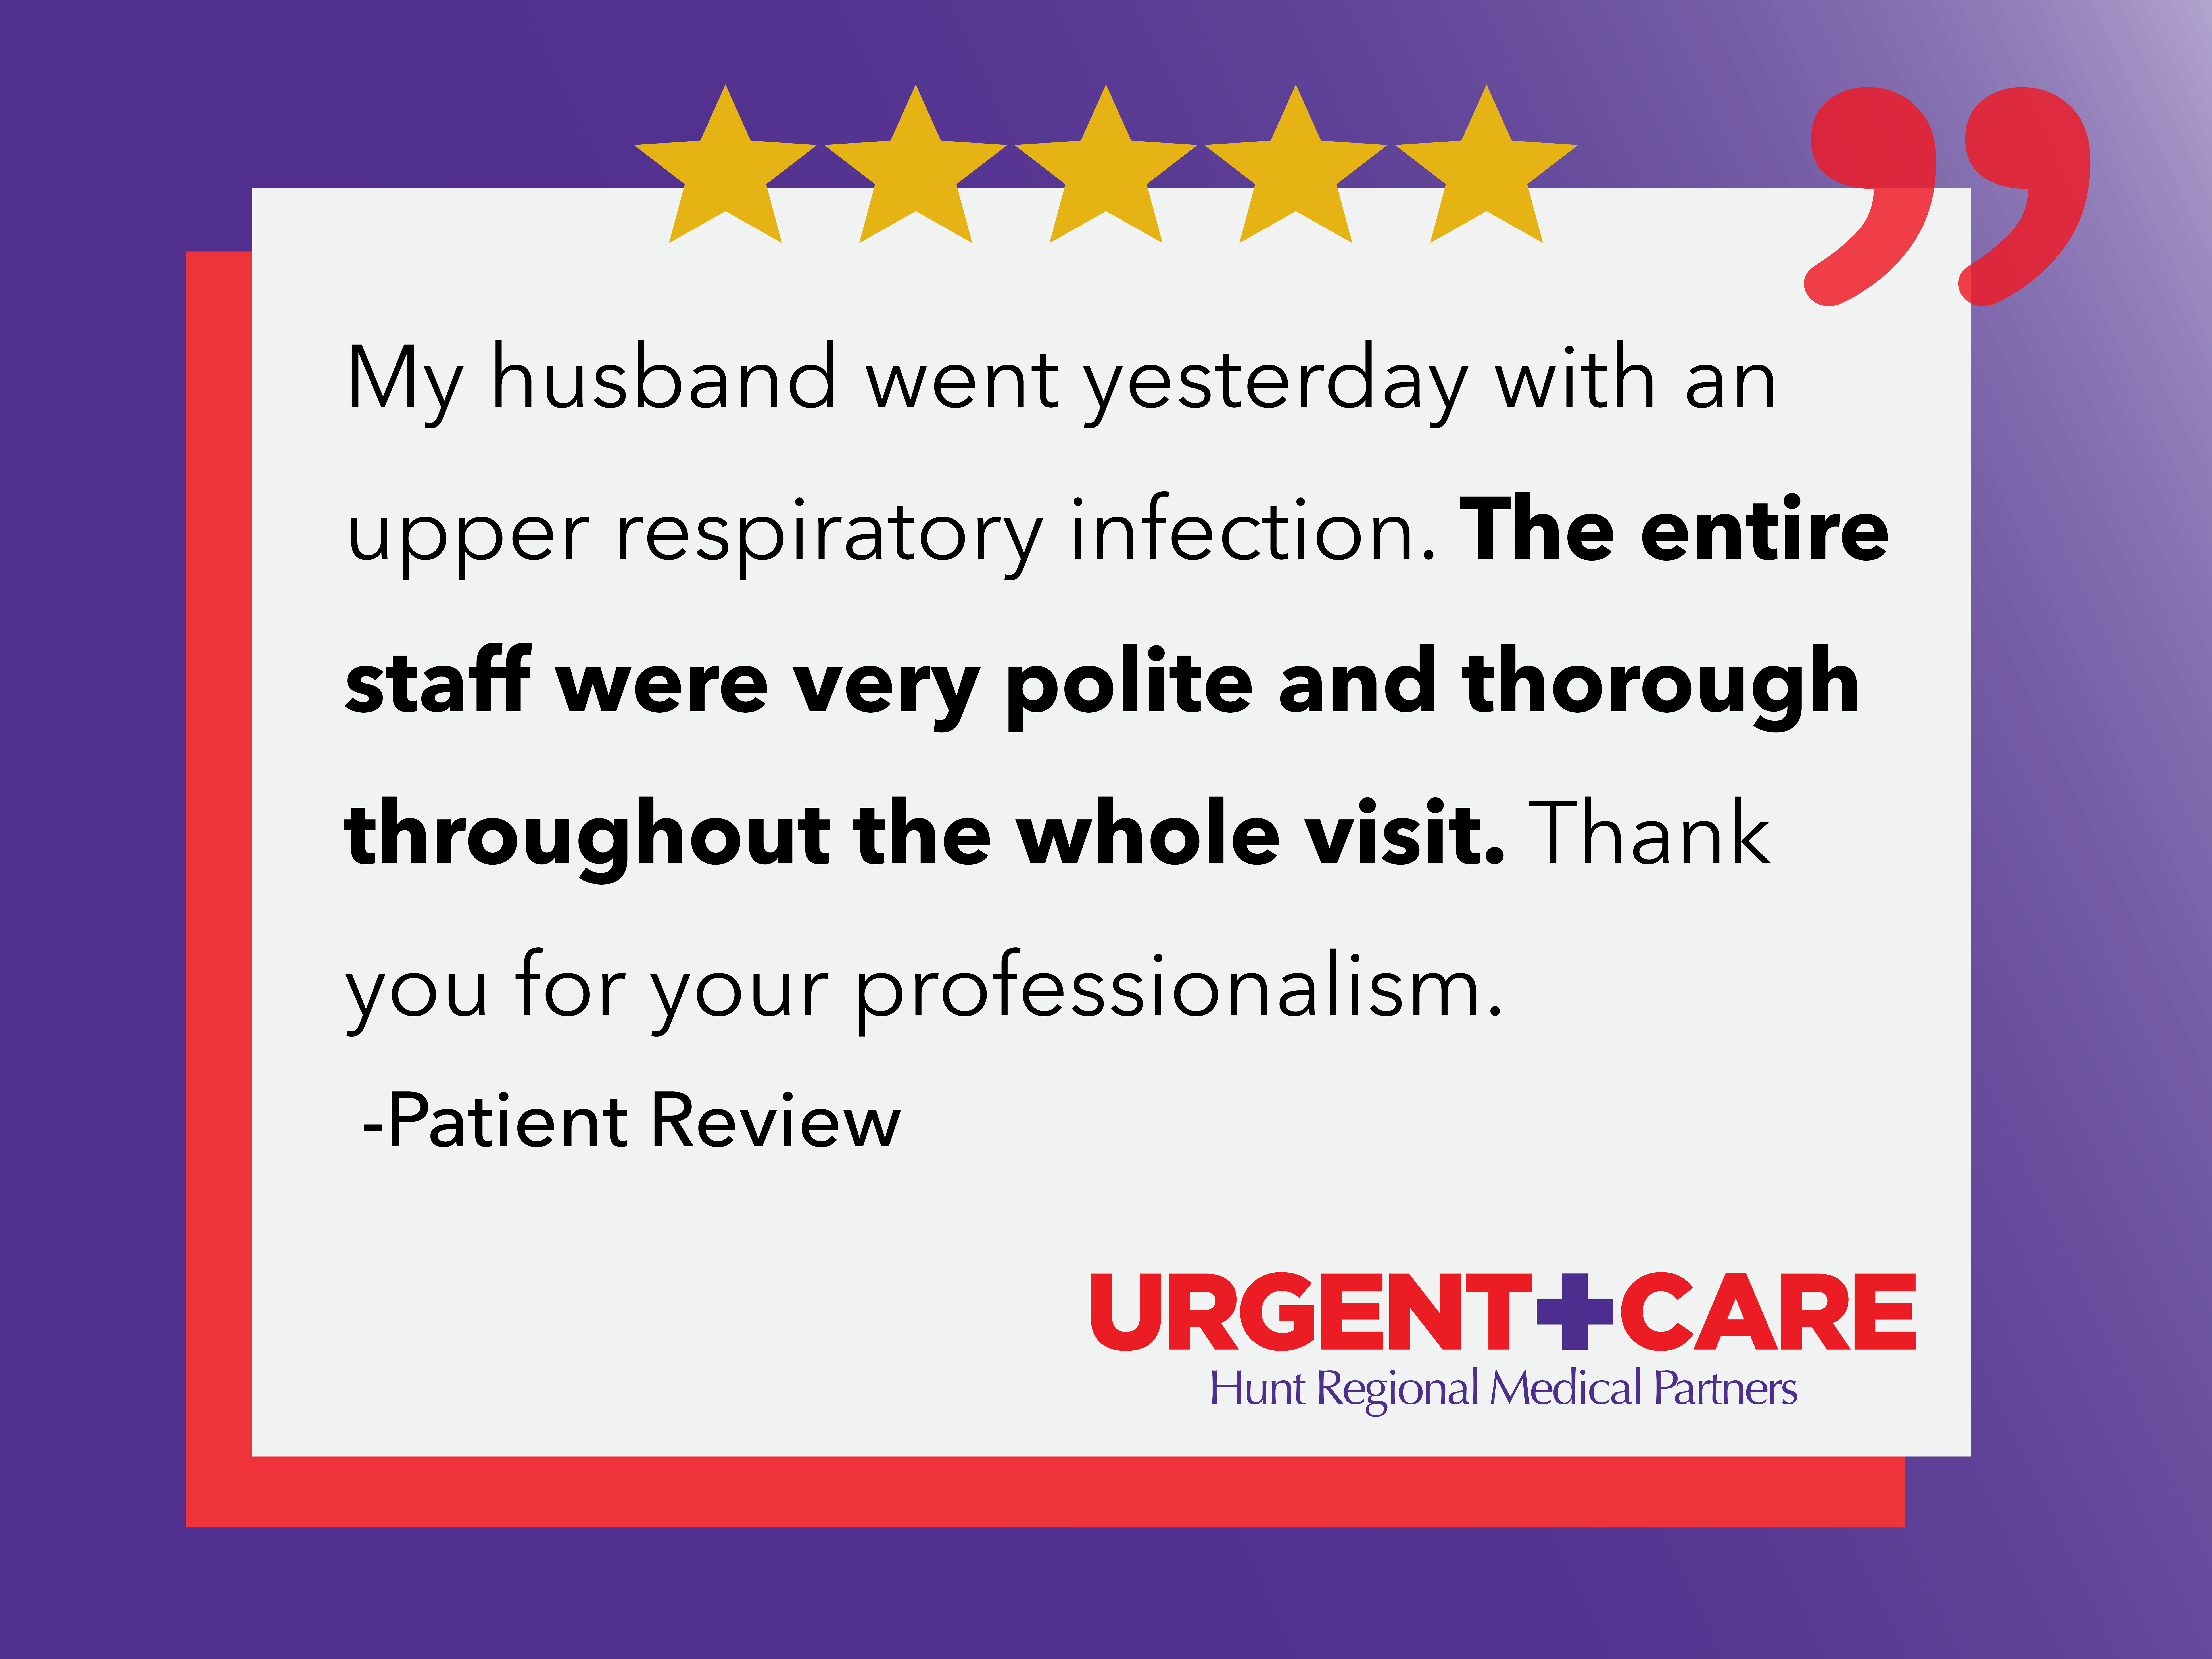 My husband went yesterday with an upper respiratory infection. The entire staff were very polite and thorough throughout the whole visit. Thank you for your professionalism. | Patient Review | Urgent Care | Hunt Regional MeMy husband went yesterday with an upper respiratory infection. The entire staff were very polite and thorough throughout the whole visit. Thank you for your professionalism. | Patient Review | Urgent Care | Hunt Regional Medical Partnersdical Partners